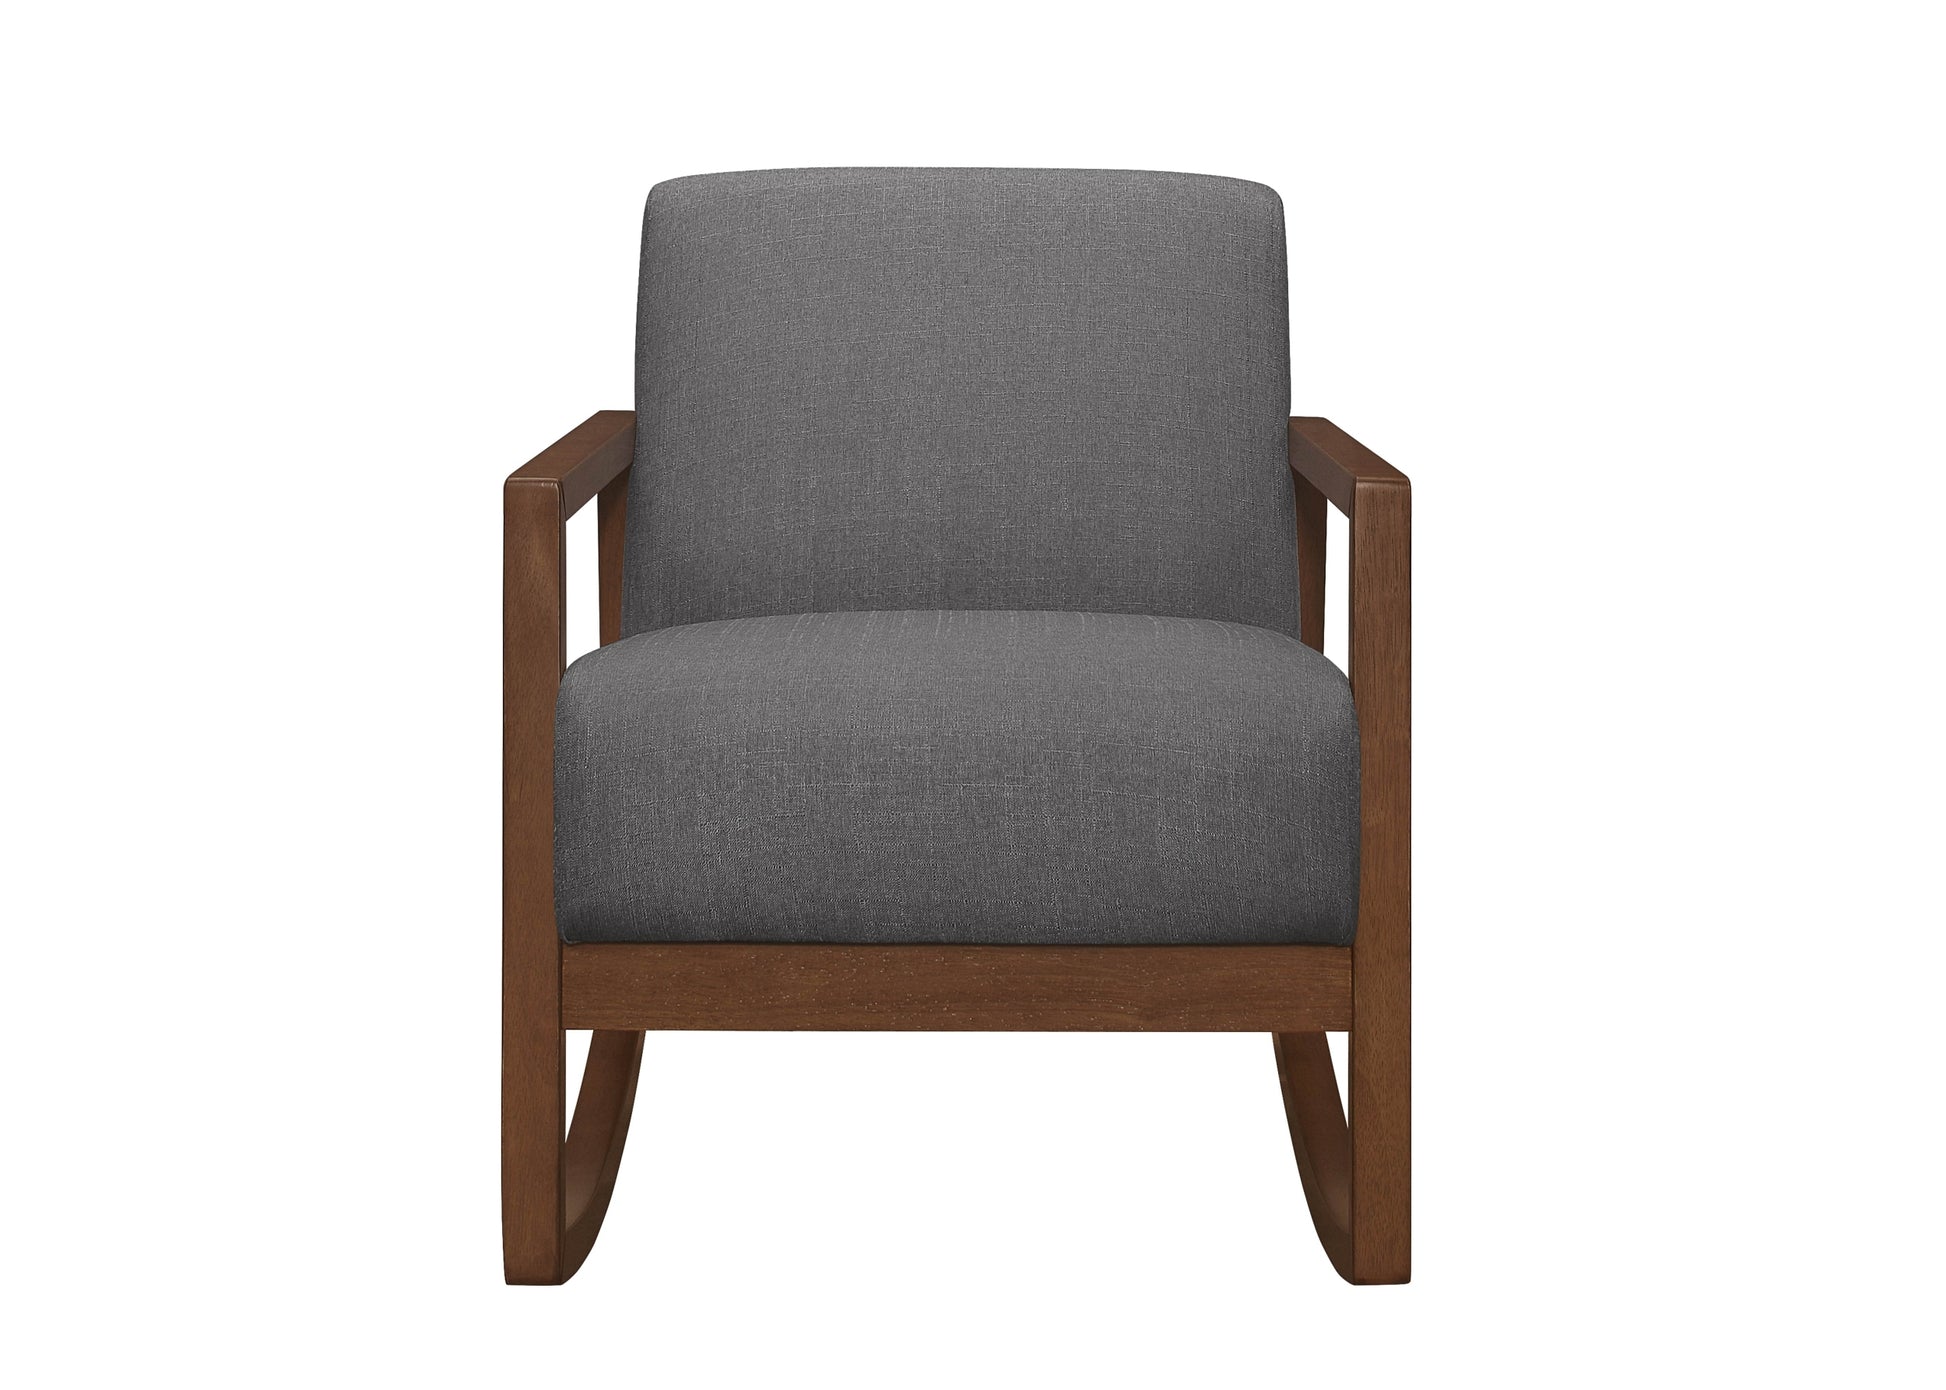 1pc Rocker Accent Chair Modern Living Room Plush gray-primary living space-modern-solid wood